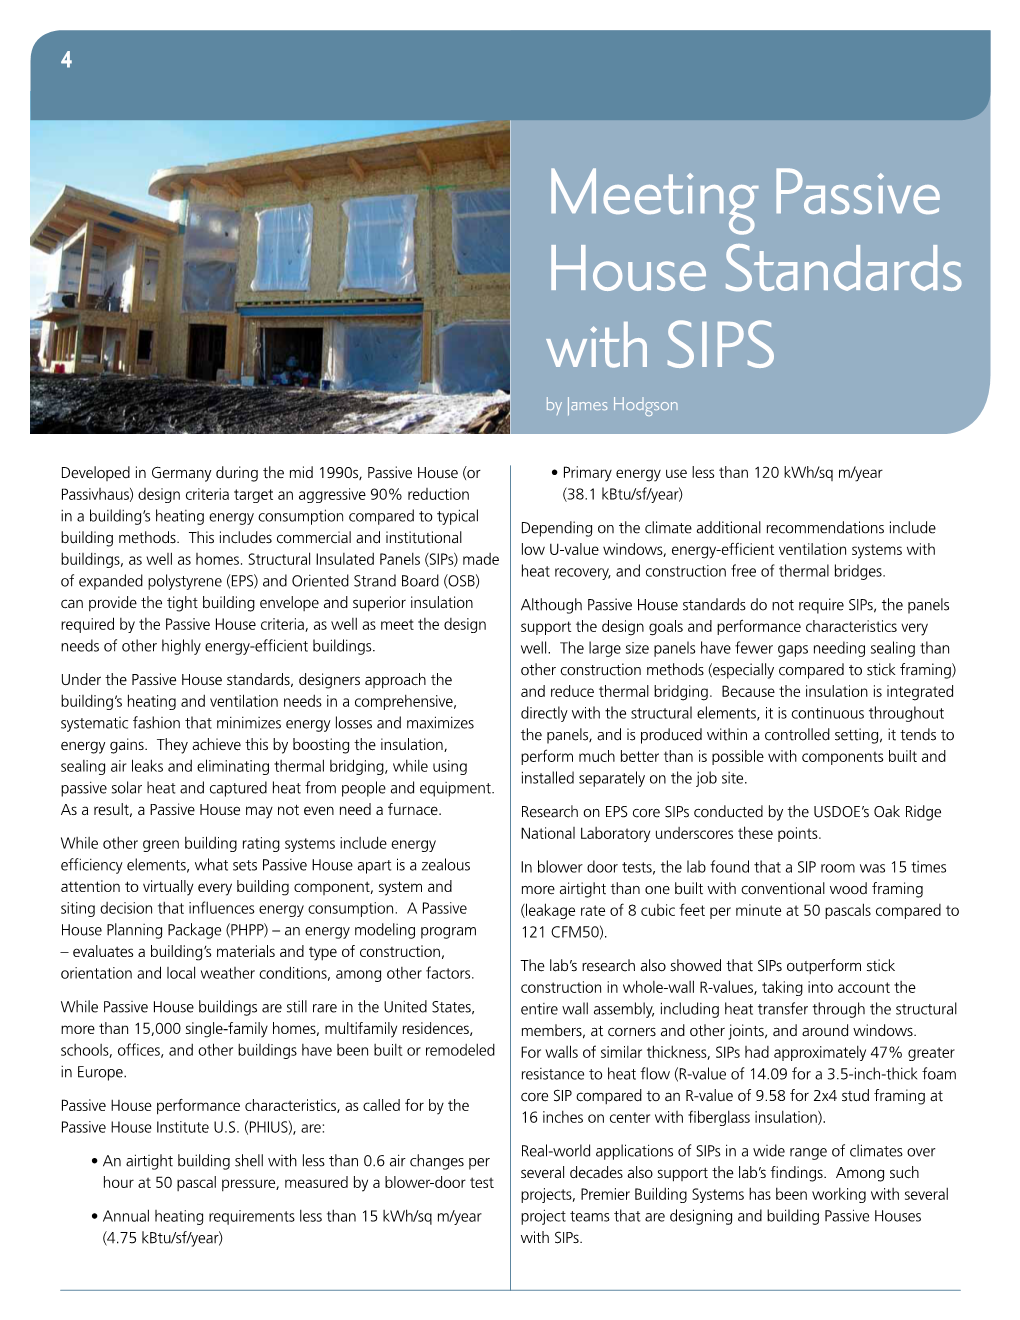 Meeting Passive House Standards with SIPS by James Hodgson